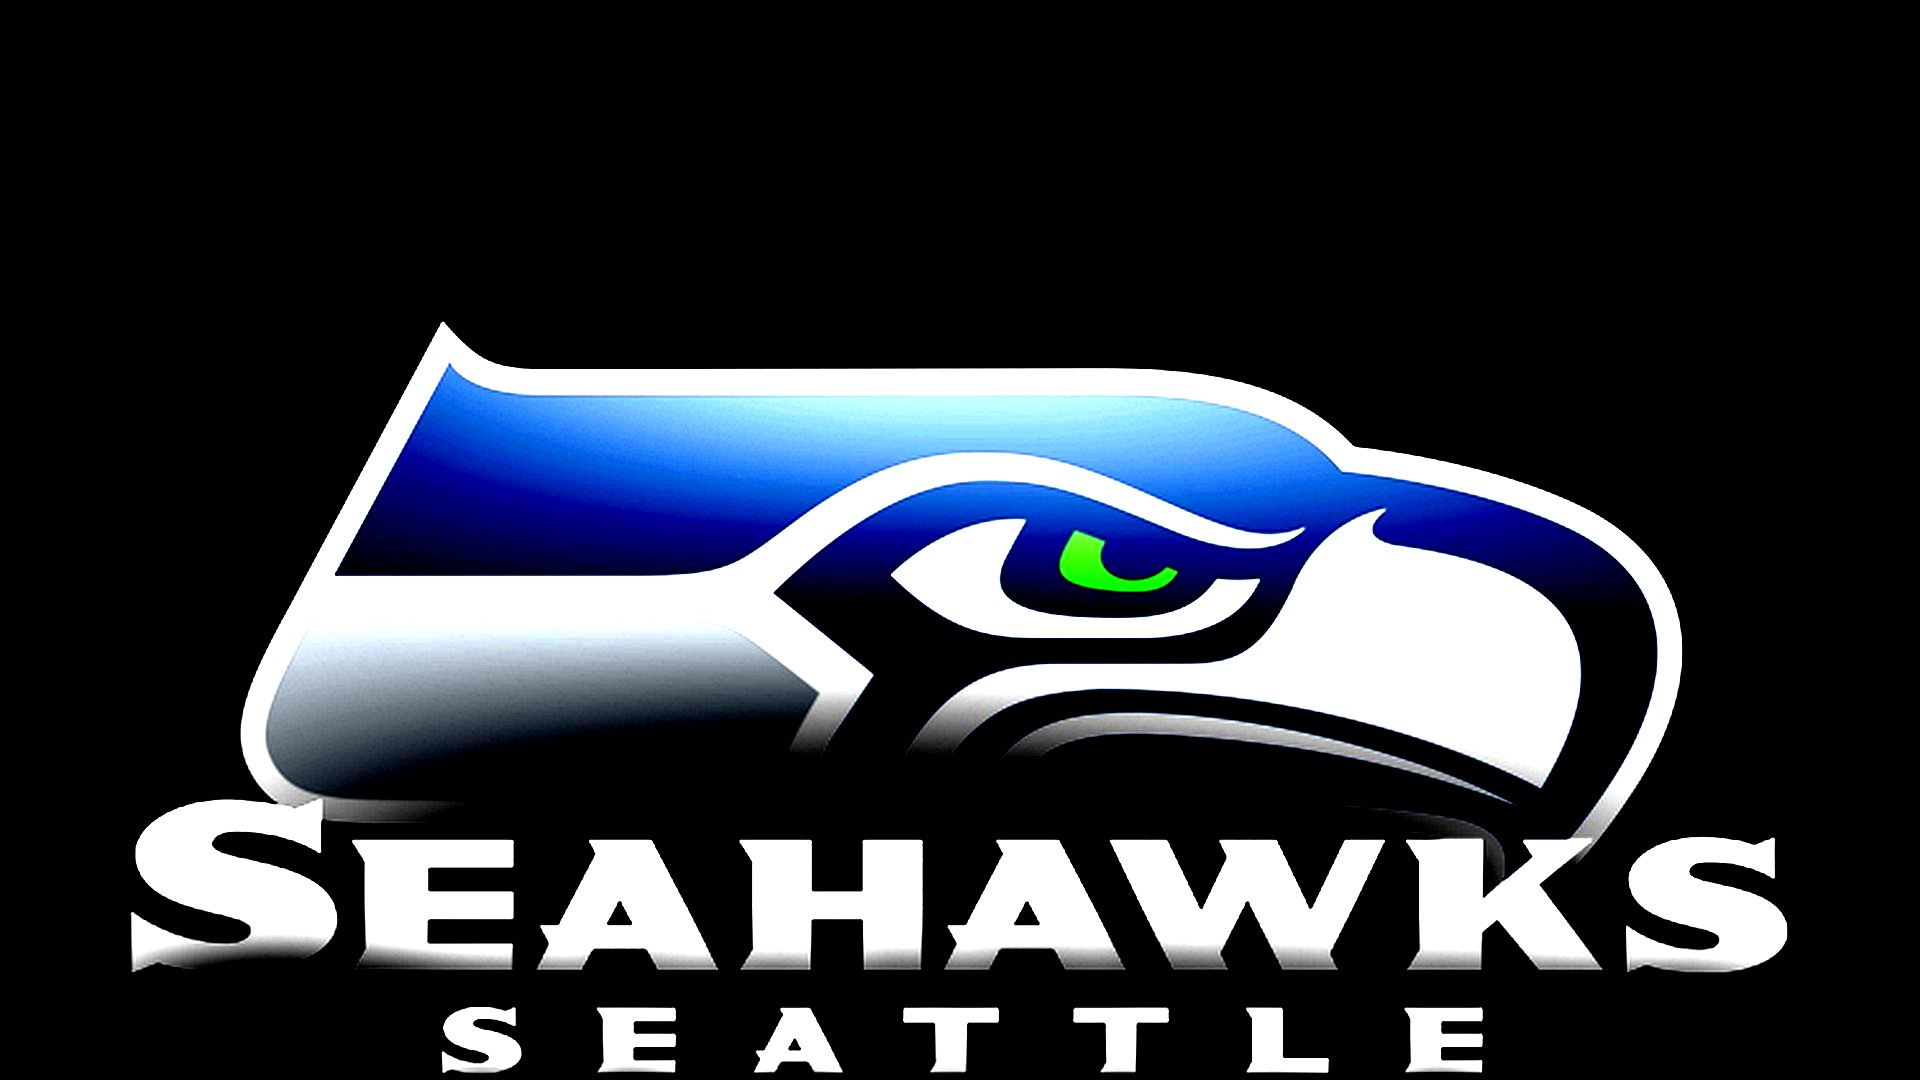 HD Backgrounds Seattle Seahawks NFL With high-resolution 1920X1080 pixel. You can use this wallpaper for your Mac or Windows Desktop Background, iPhone, Android or Tablet and another Smartphone device